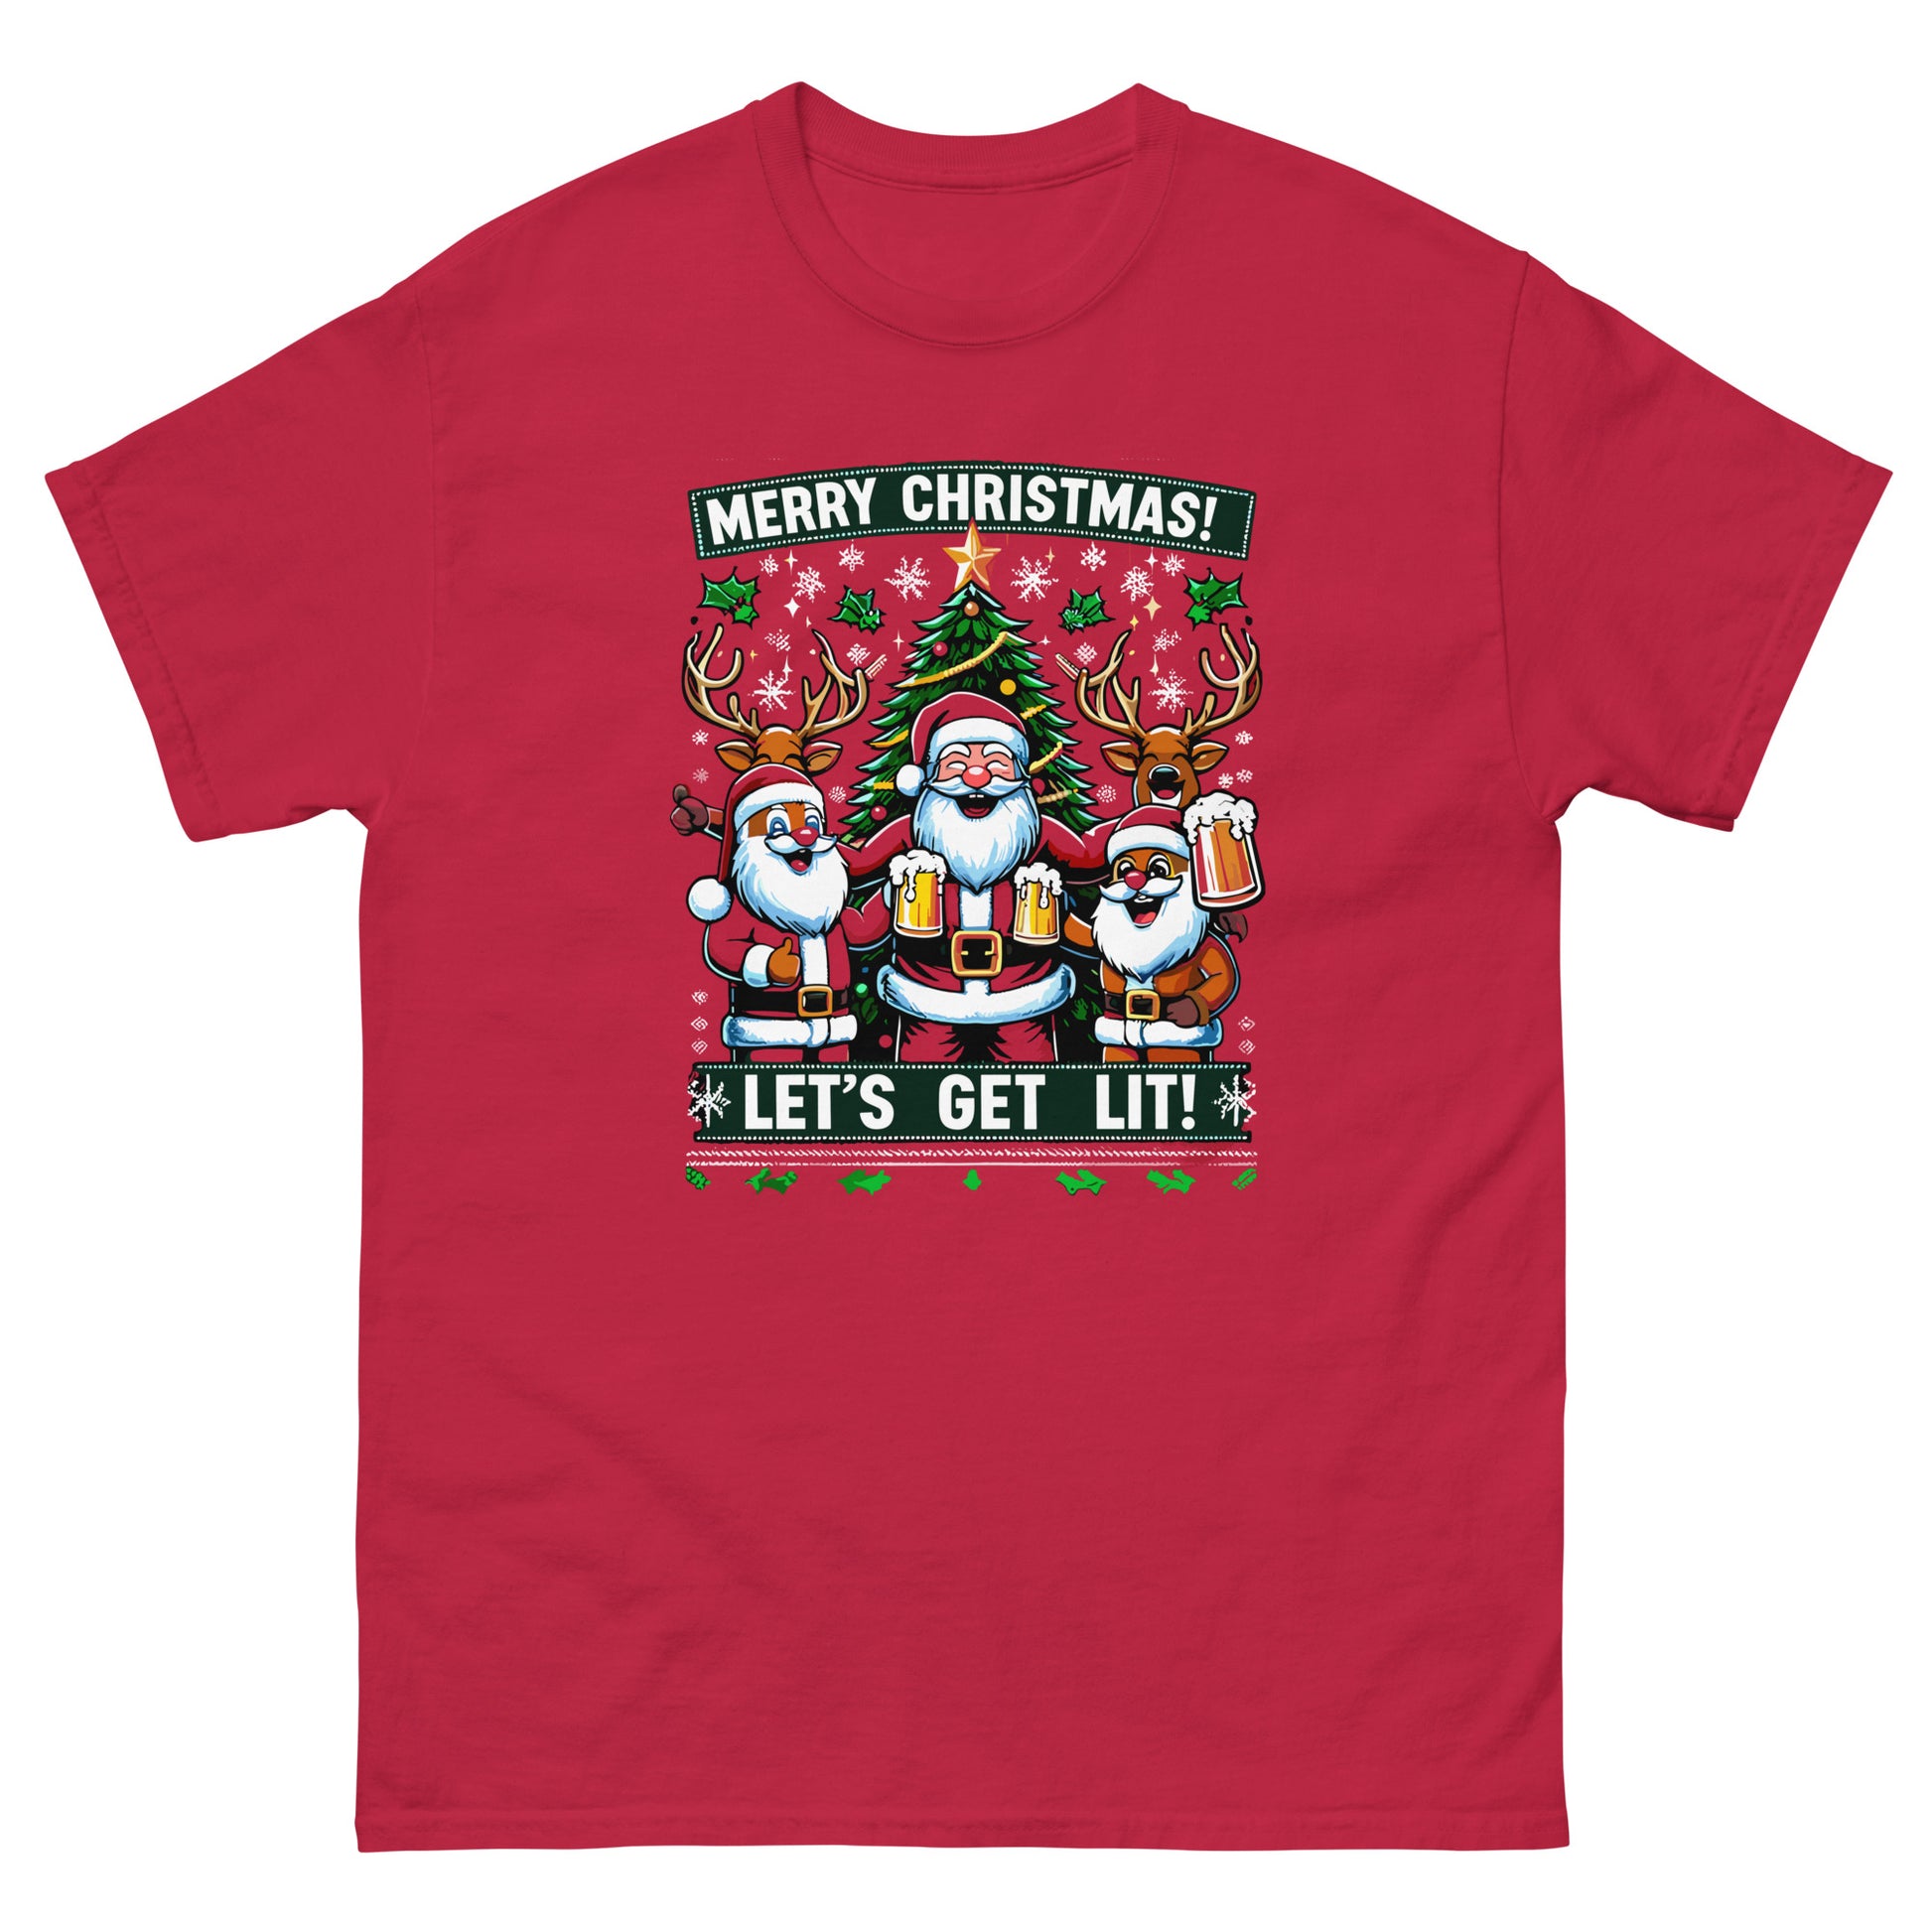 Merry Christmas lets get lit with santa printed ugly christmas t-shirt by whistler shirts